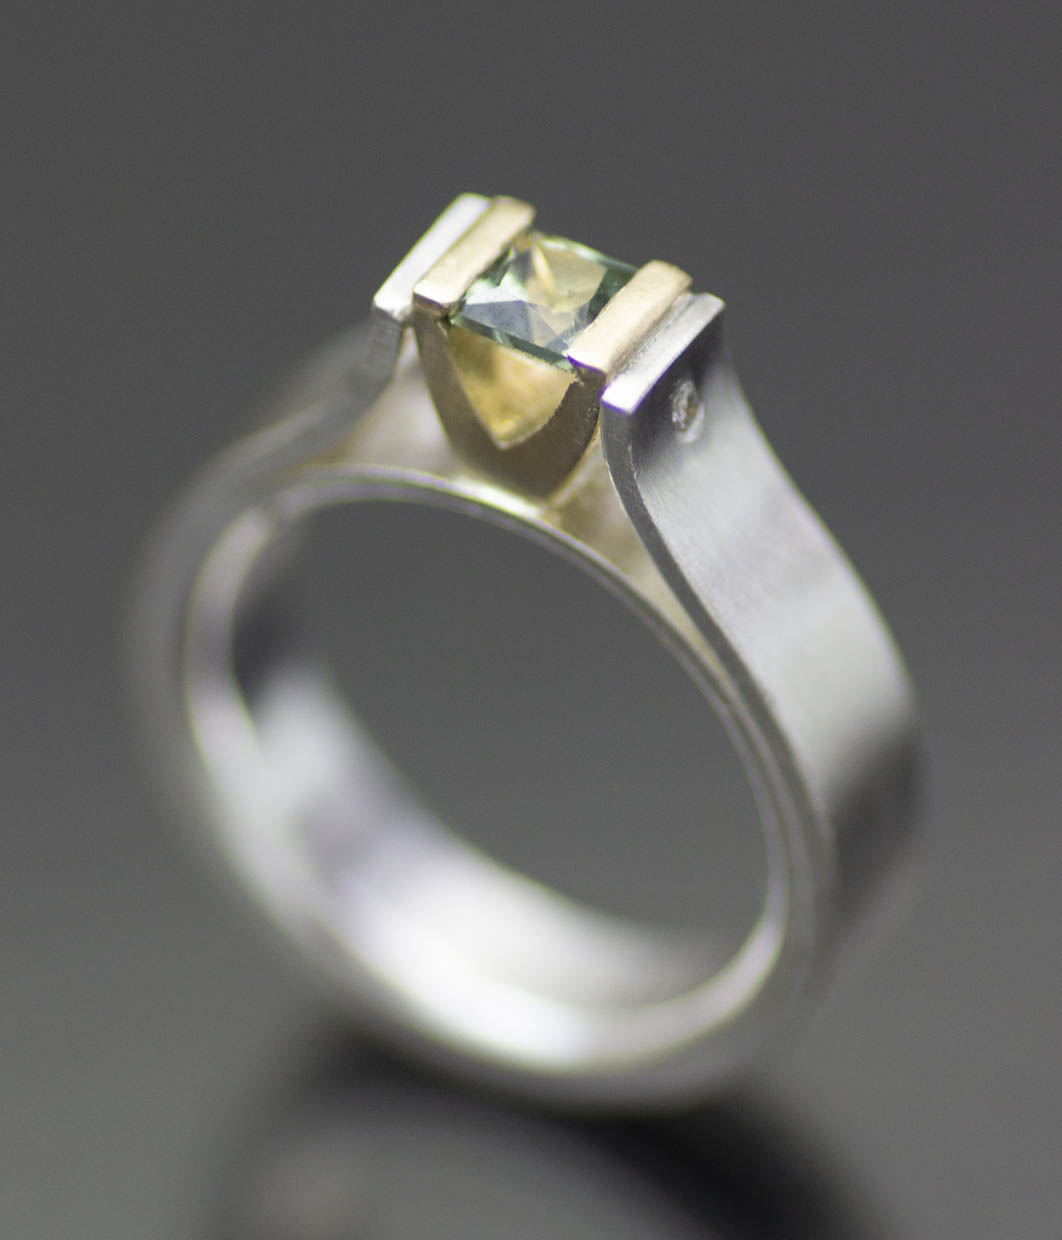 Lolide Seattle USA is a lesbian, gay, queer LGBTQIA+ wedding and engagement jeweler crafting this green sapphire canyon ring